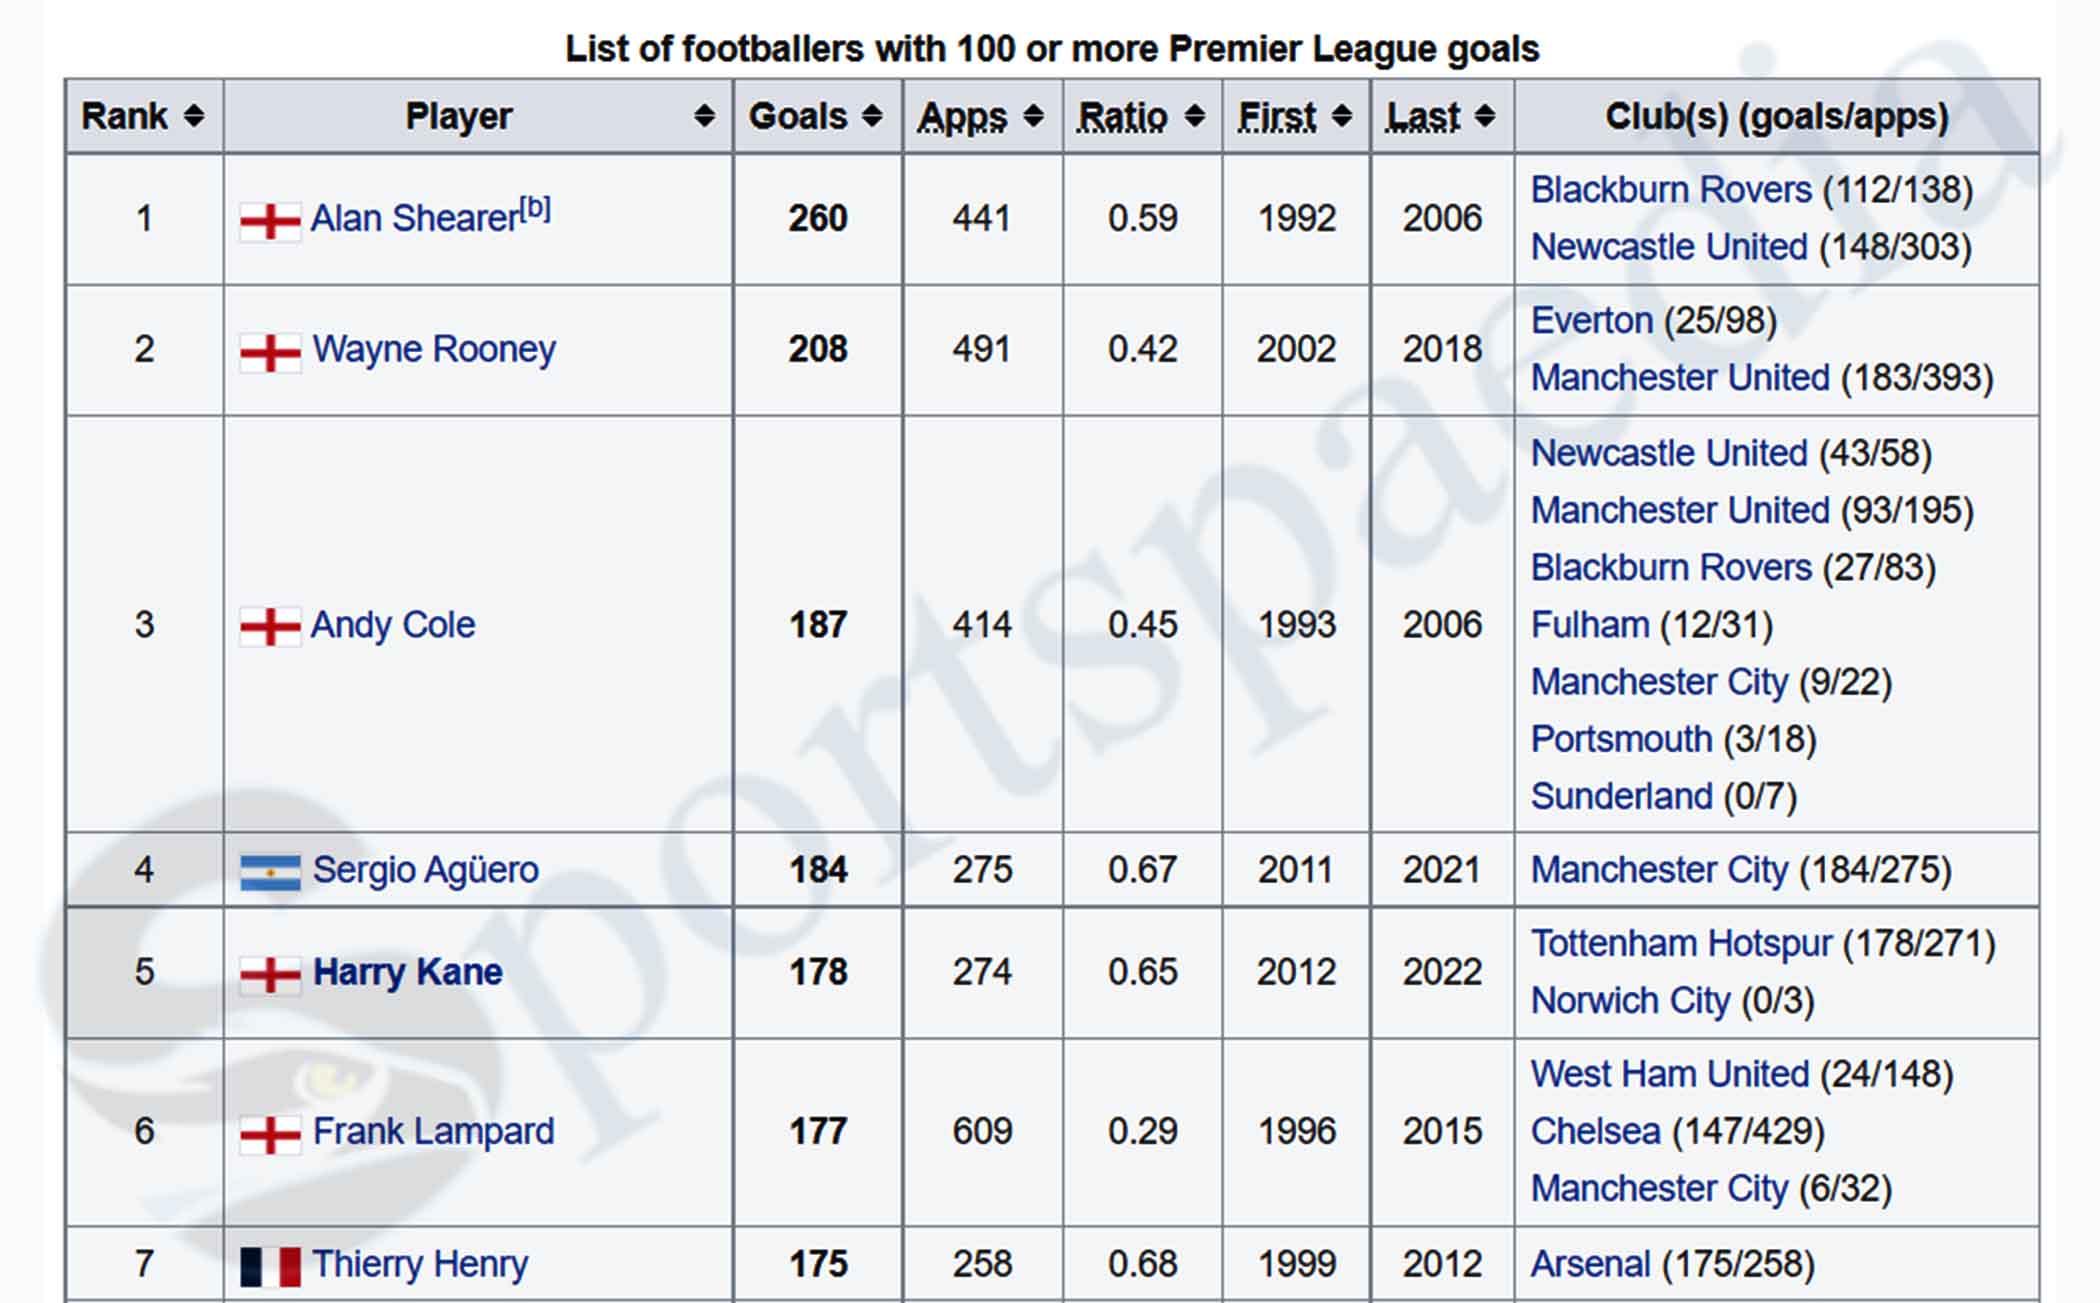 List of Footballers with 100 or More Premier League Goals